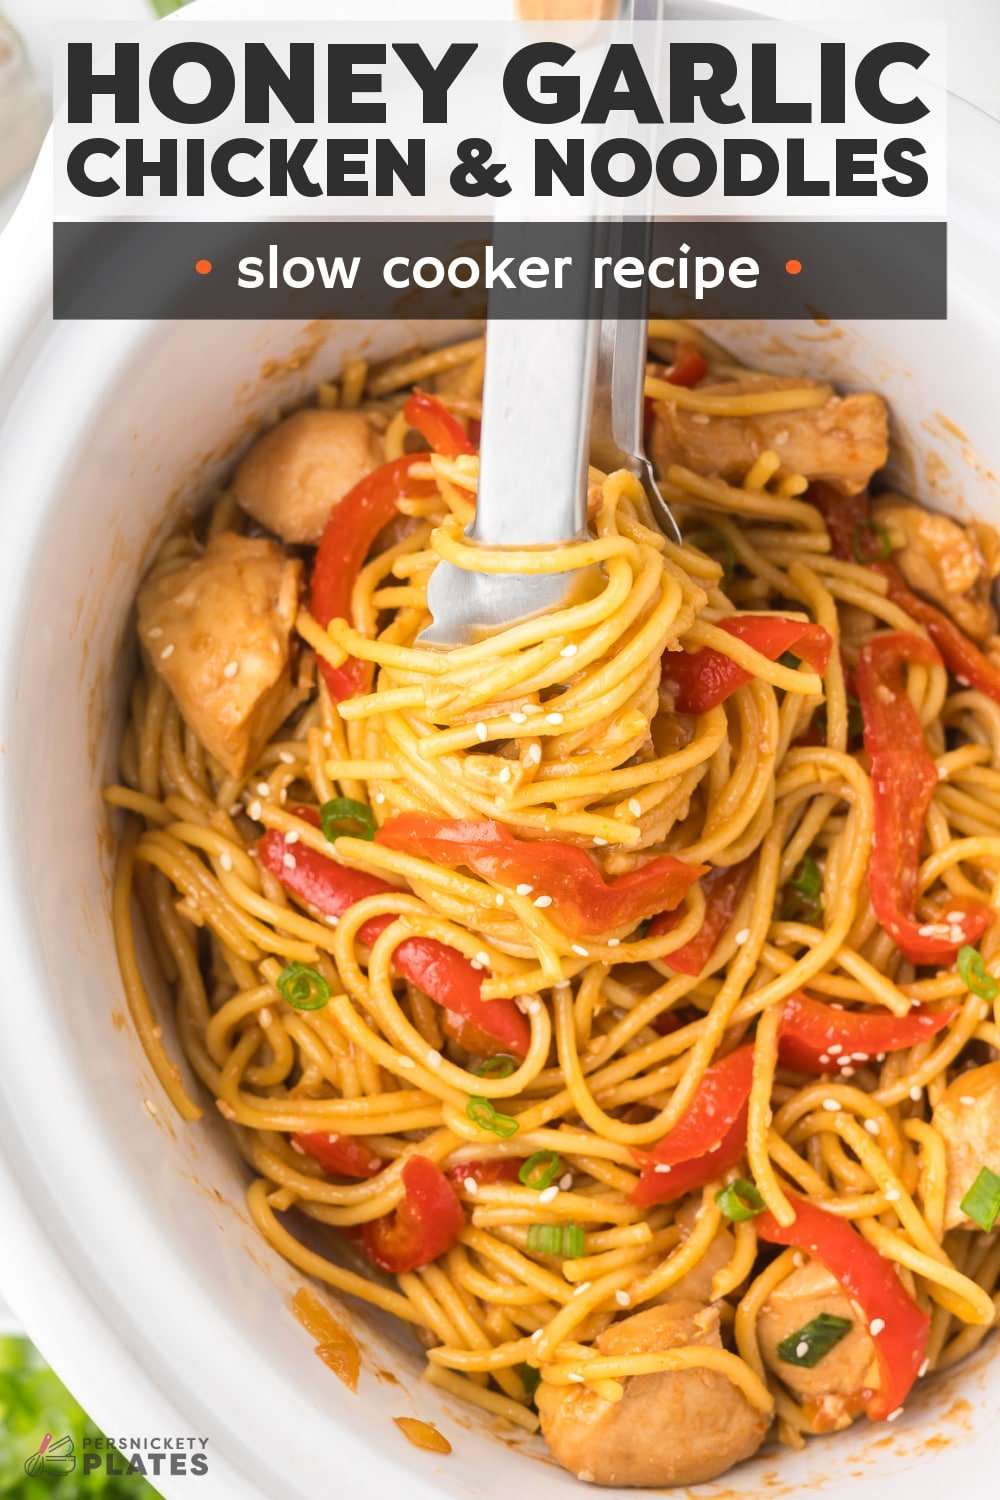 Slow Cooker Honey Garlic Chicken combines tender chicken, red bell peppers, and onions in a super flavorful honey garlic sauce made easily right in the crockpot. Before serving, toss your favorite noodles in the sauce for a full dinner that everyone will love. | www.persnicketyplates.com